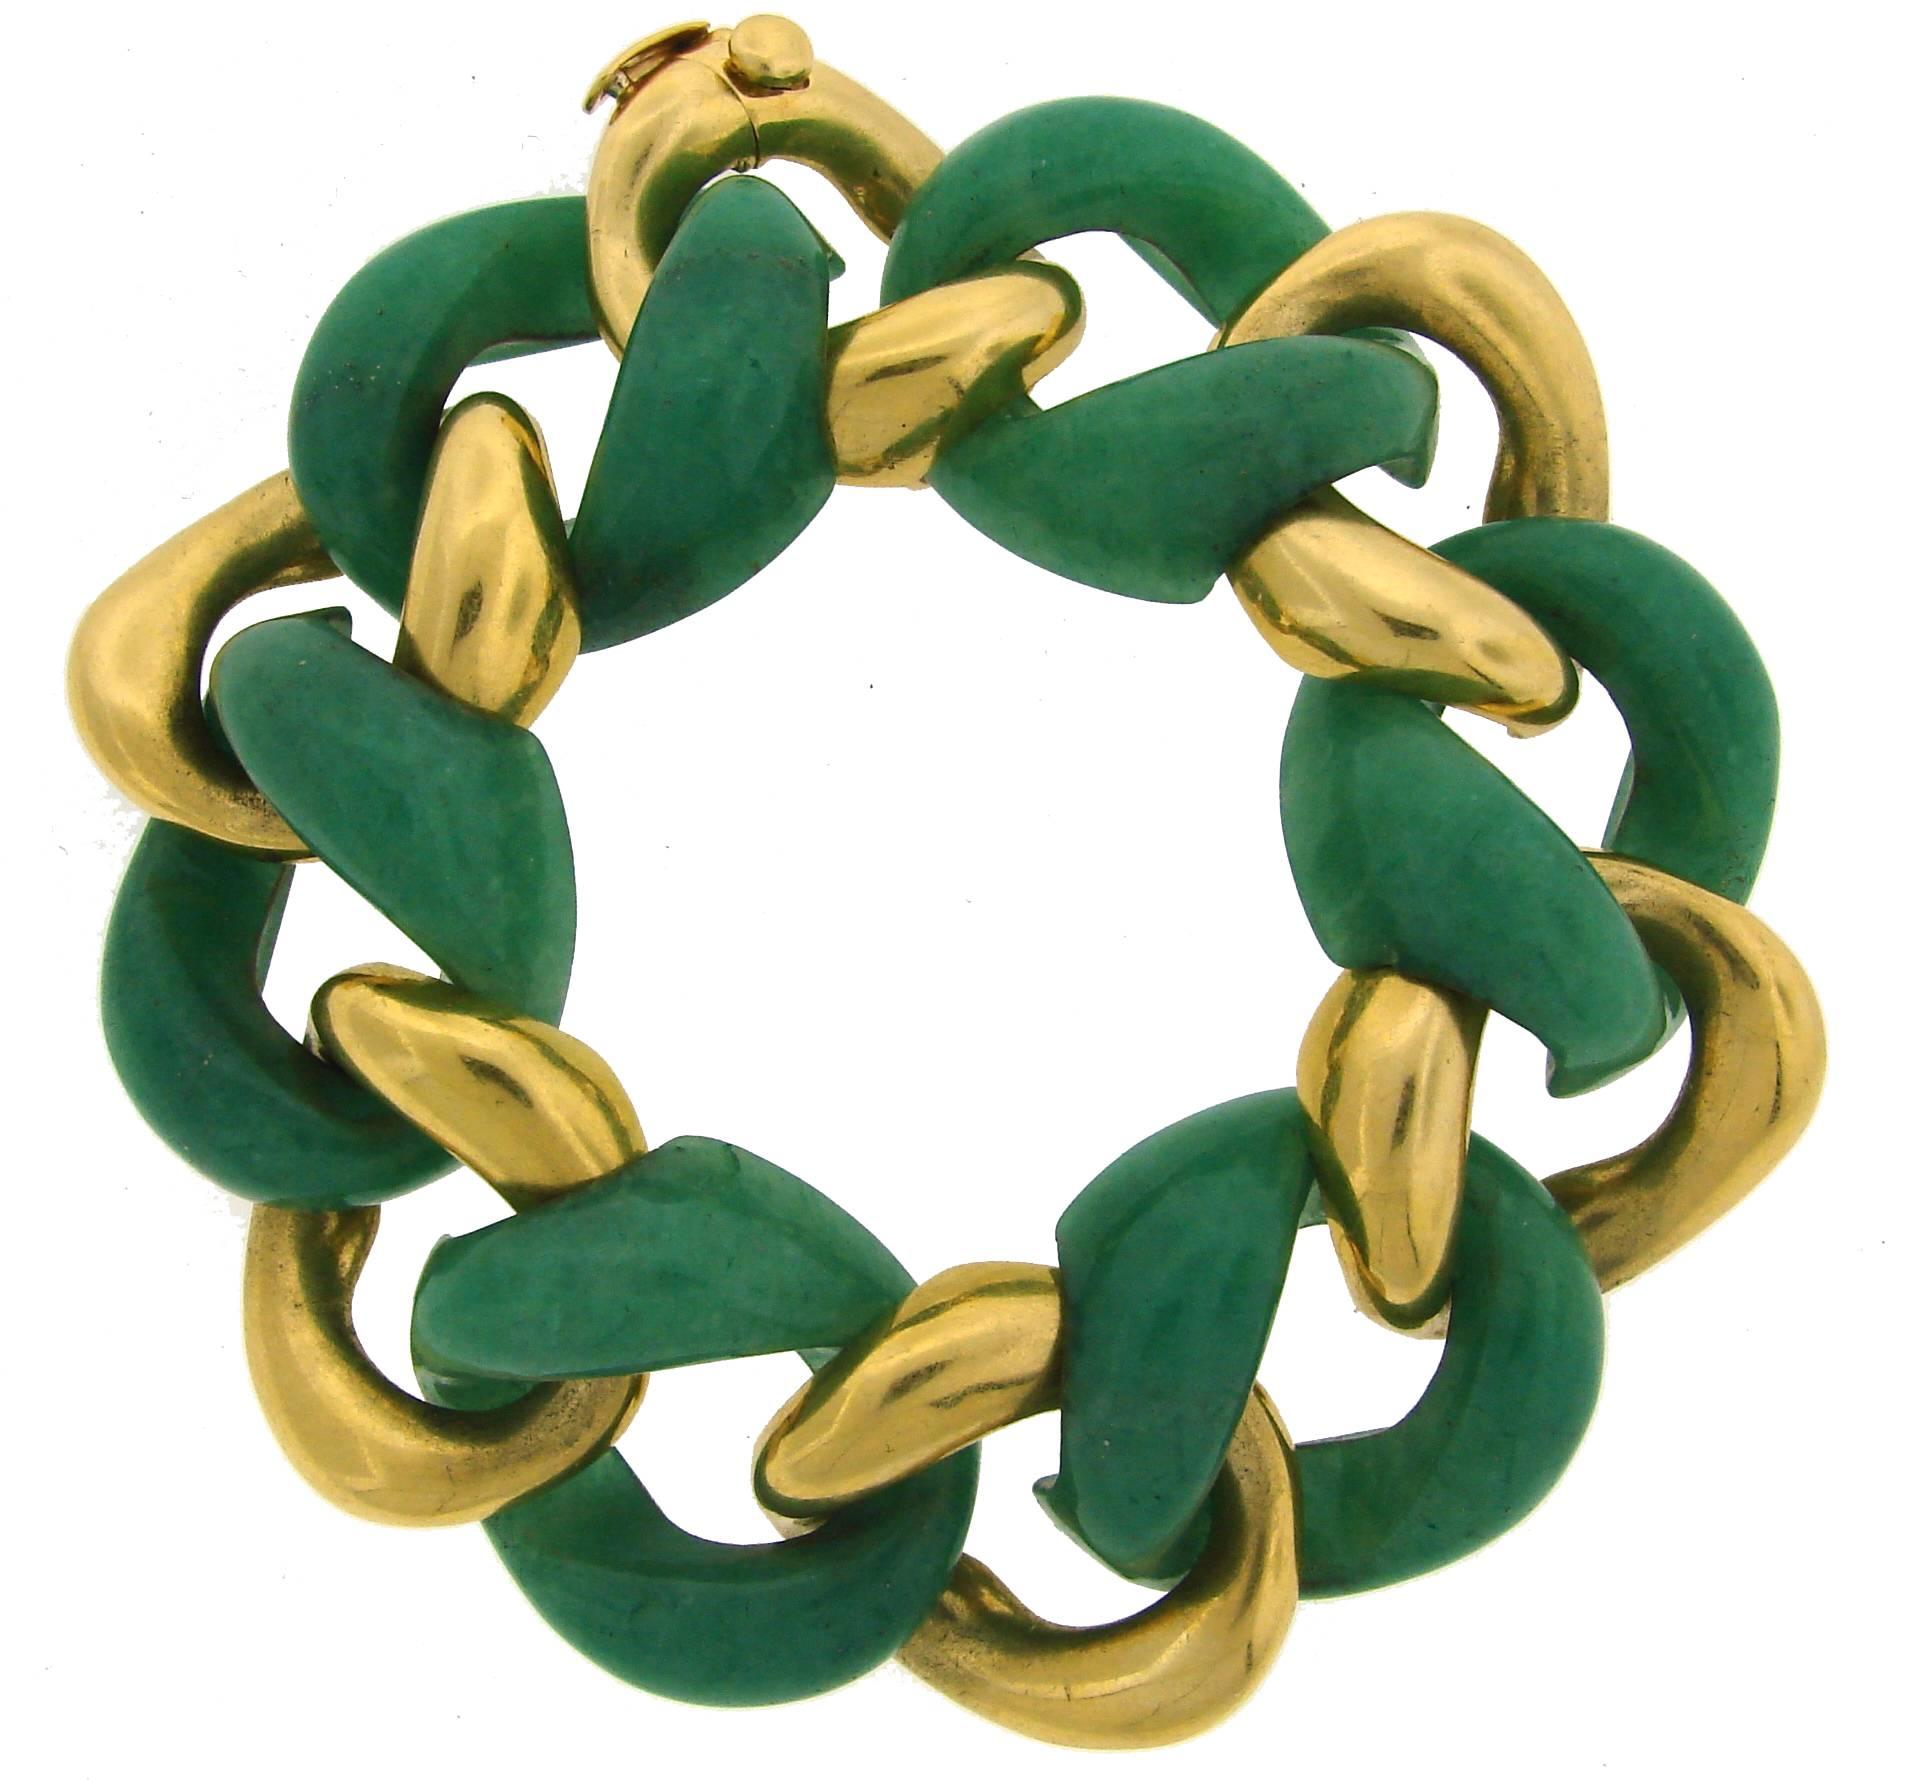 Signature Seaman Schepps bracelet with popular curb link. Bold and stylish, chic and wearable. It is made of aventurine and 18 karat (stamped) yellow gold. The bracelet is 7-3/4